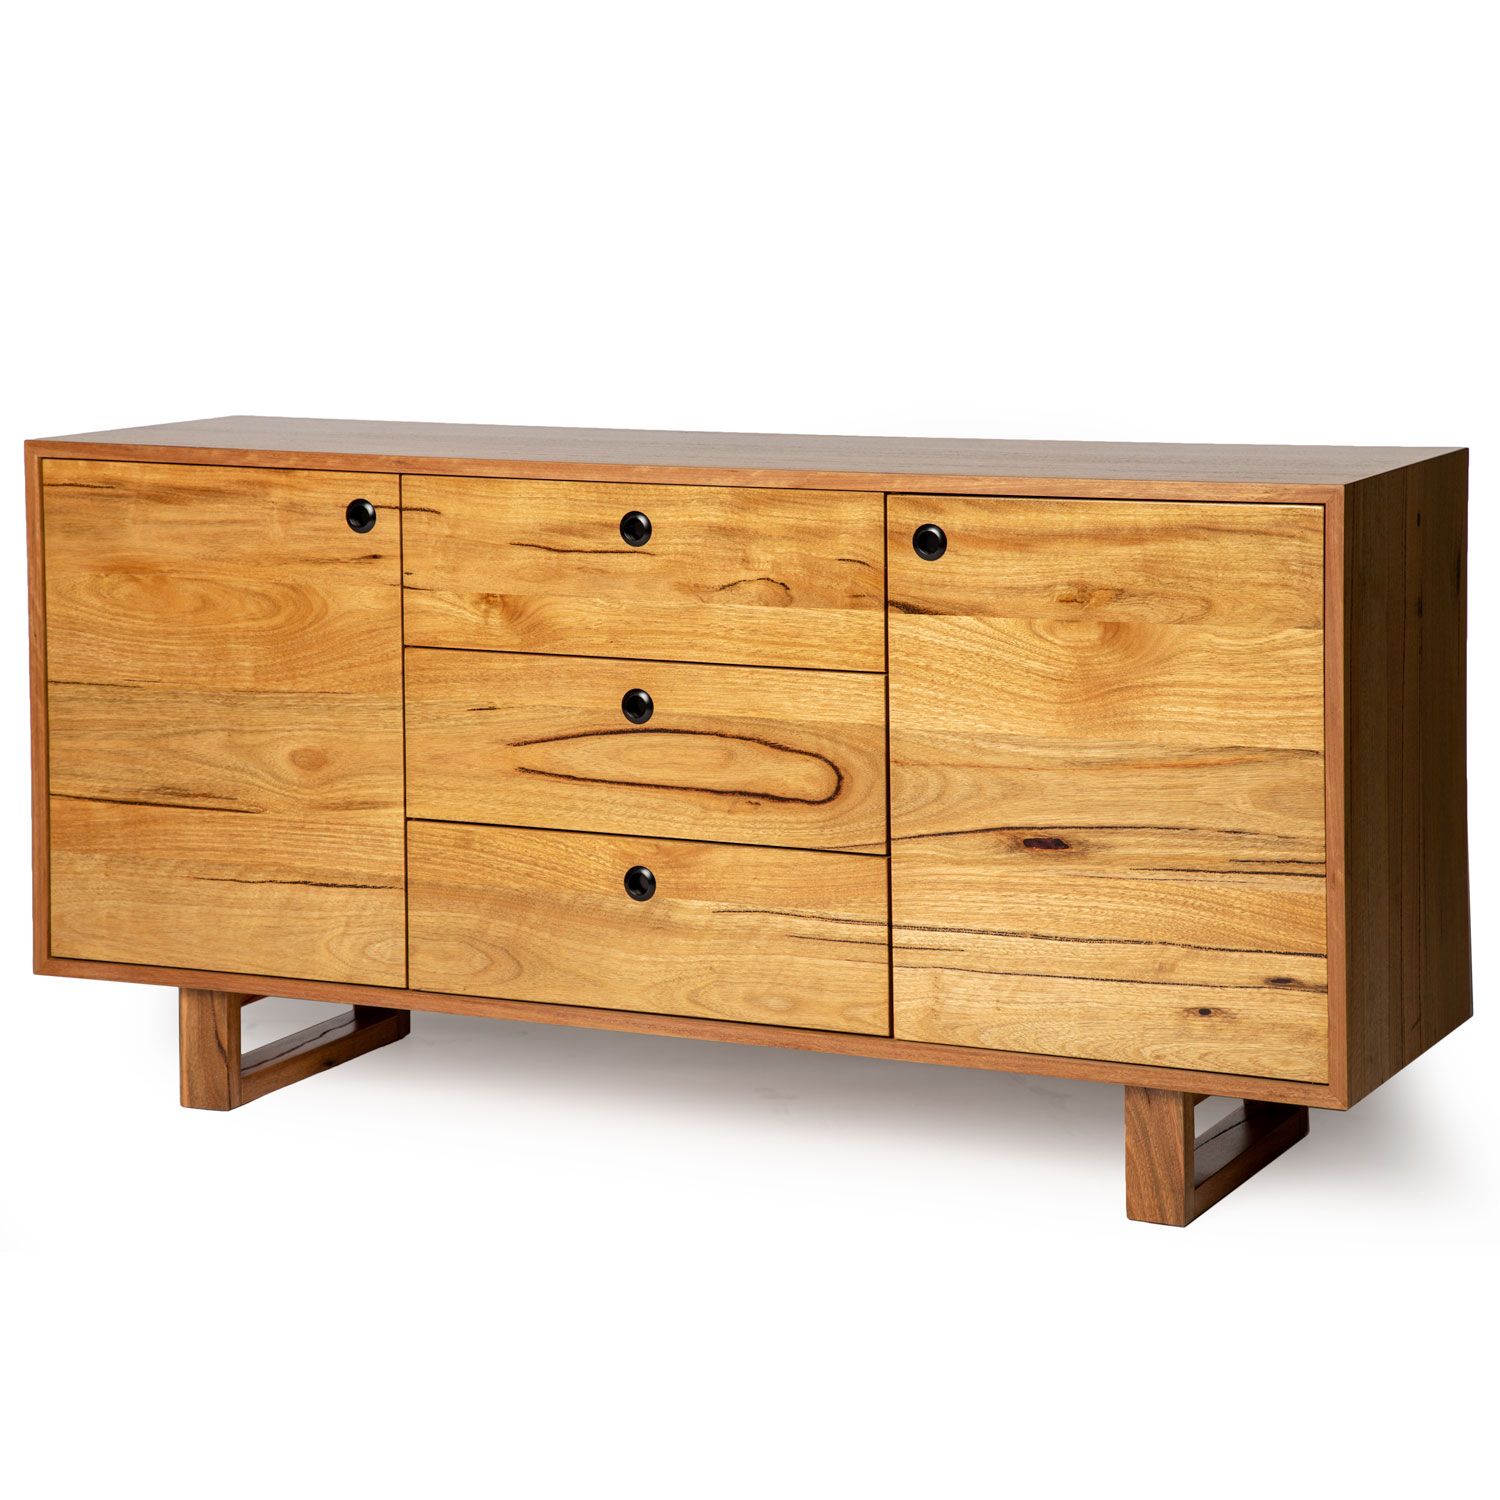 Capilano | Sideboard – Marri Wood Pertaining To Solid Wood Contemporary Sideboards Buffets (View 21 of 30)